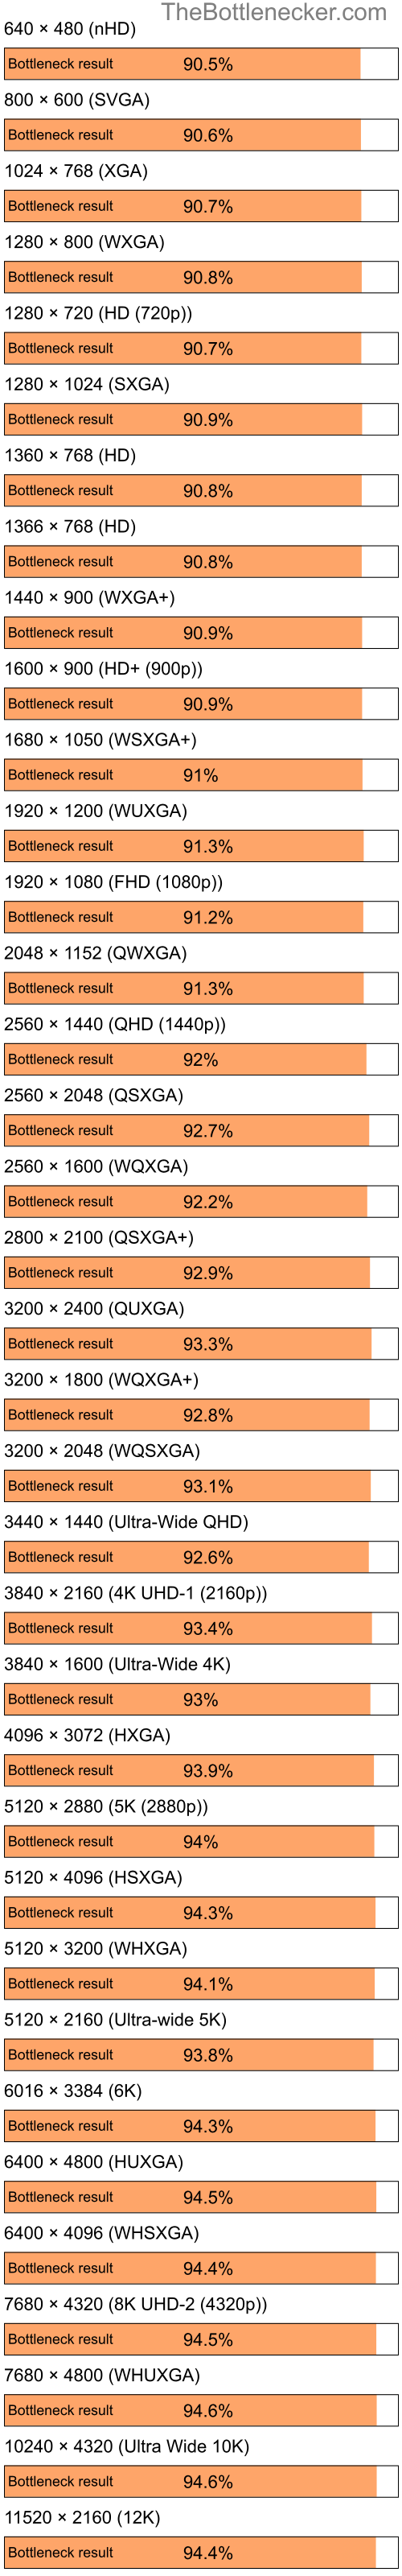 Bottleneck results by resolution for Intel Pentium 4 and AMD Radeon 9200 PRO Family in General Tasks